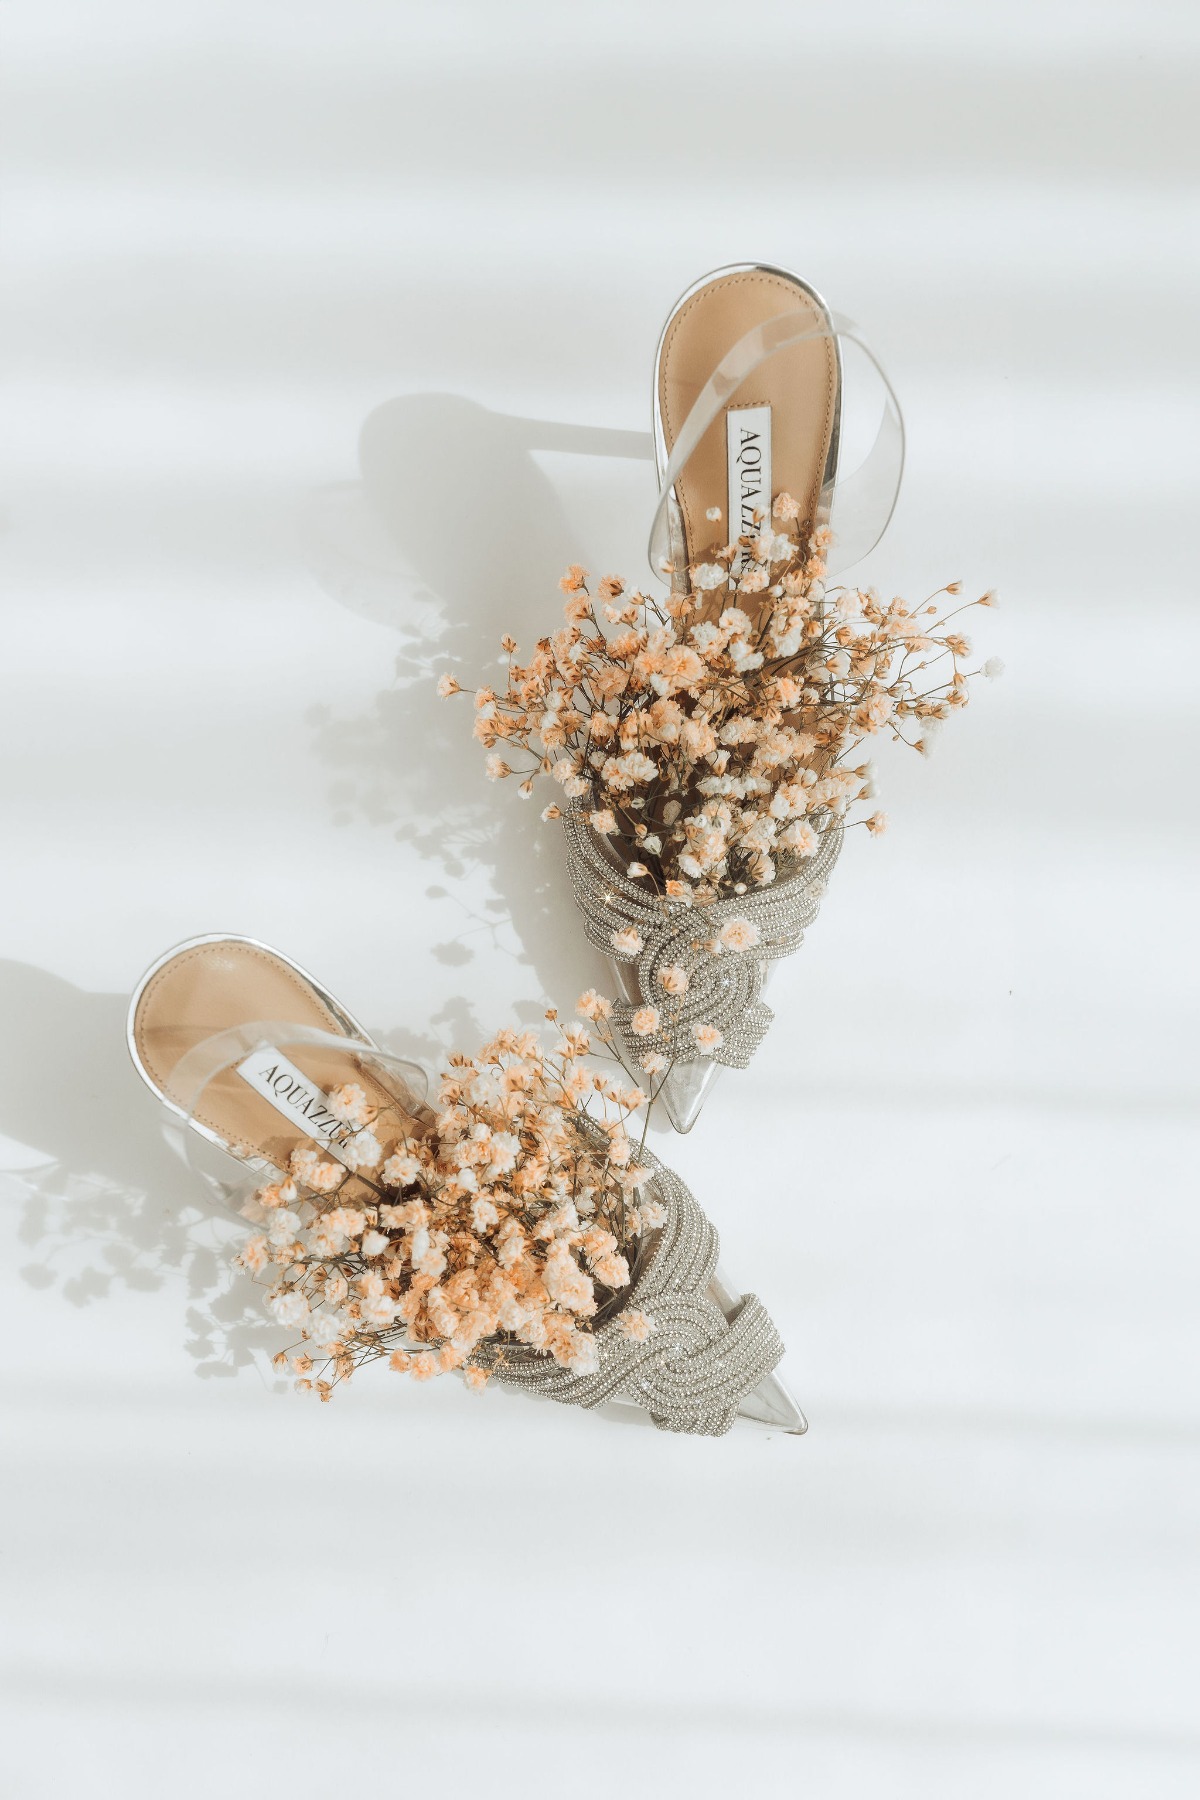 sparkly wedding shoes